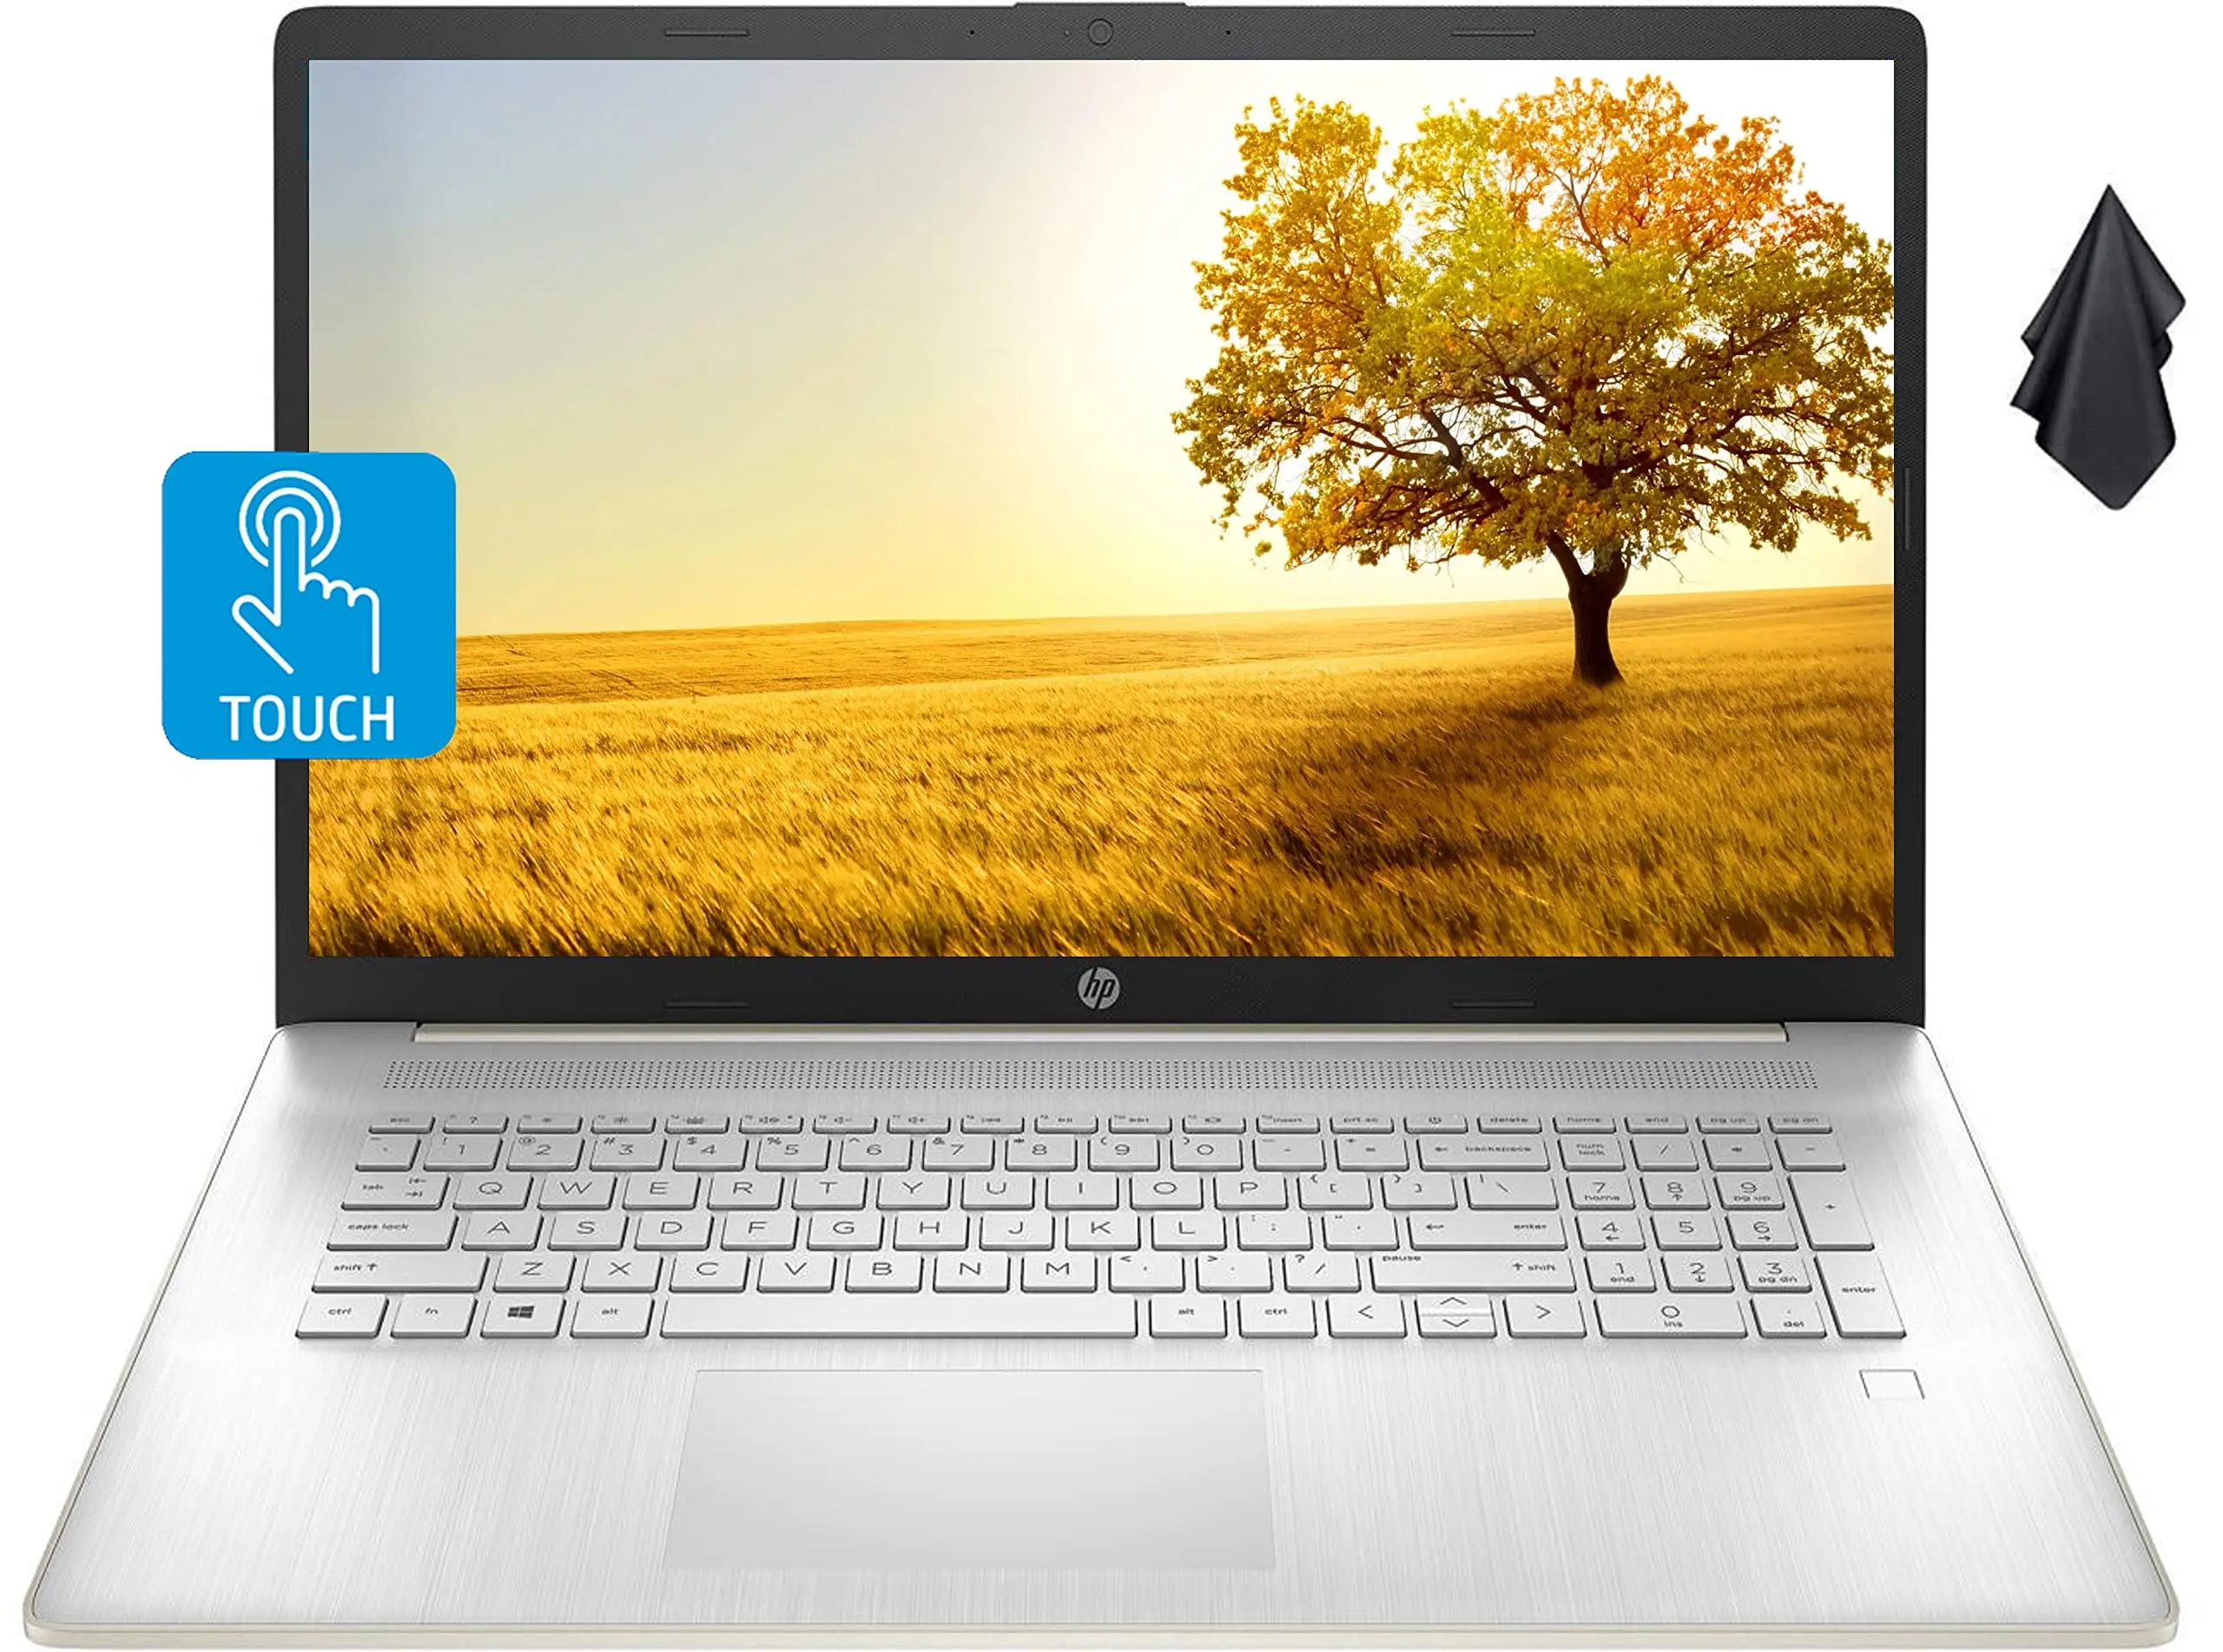 hewlett-packard pavilion 17 touchscreen - Is HP Pavilion 15 i7 touch screen